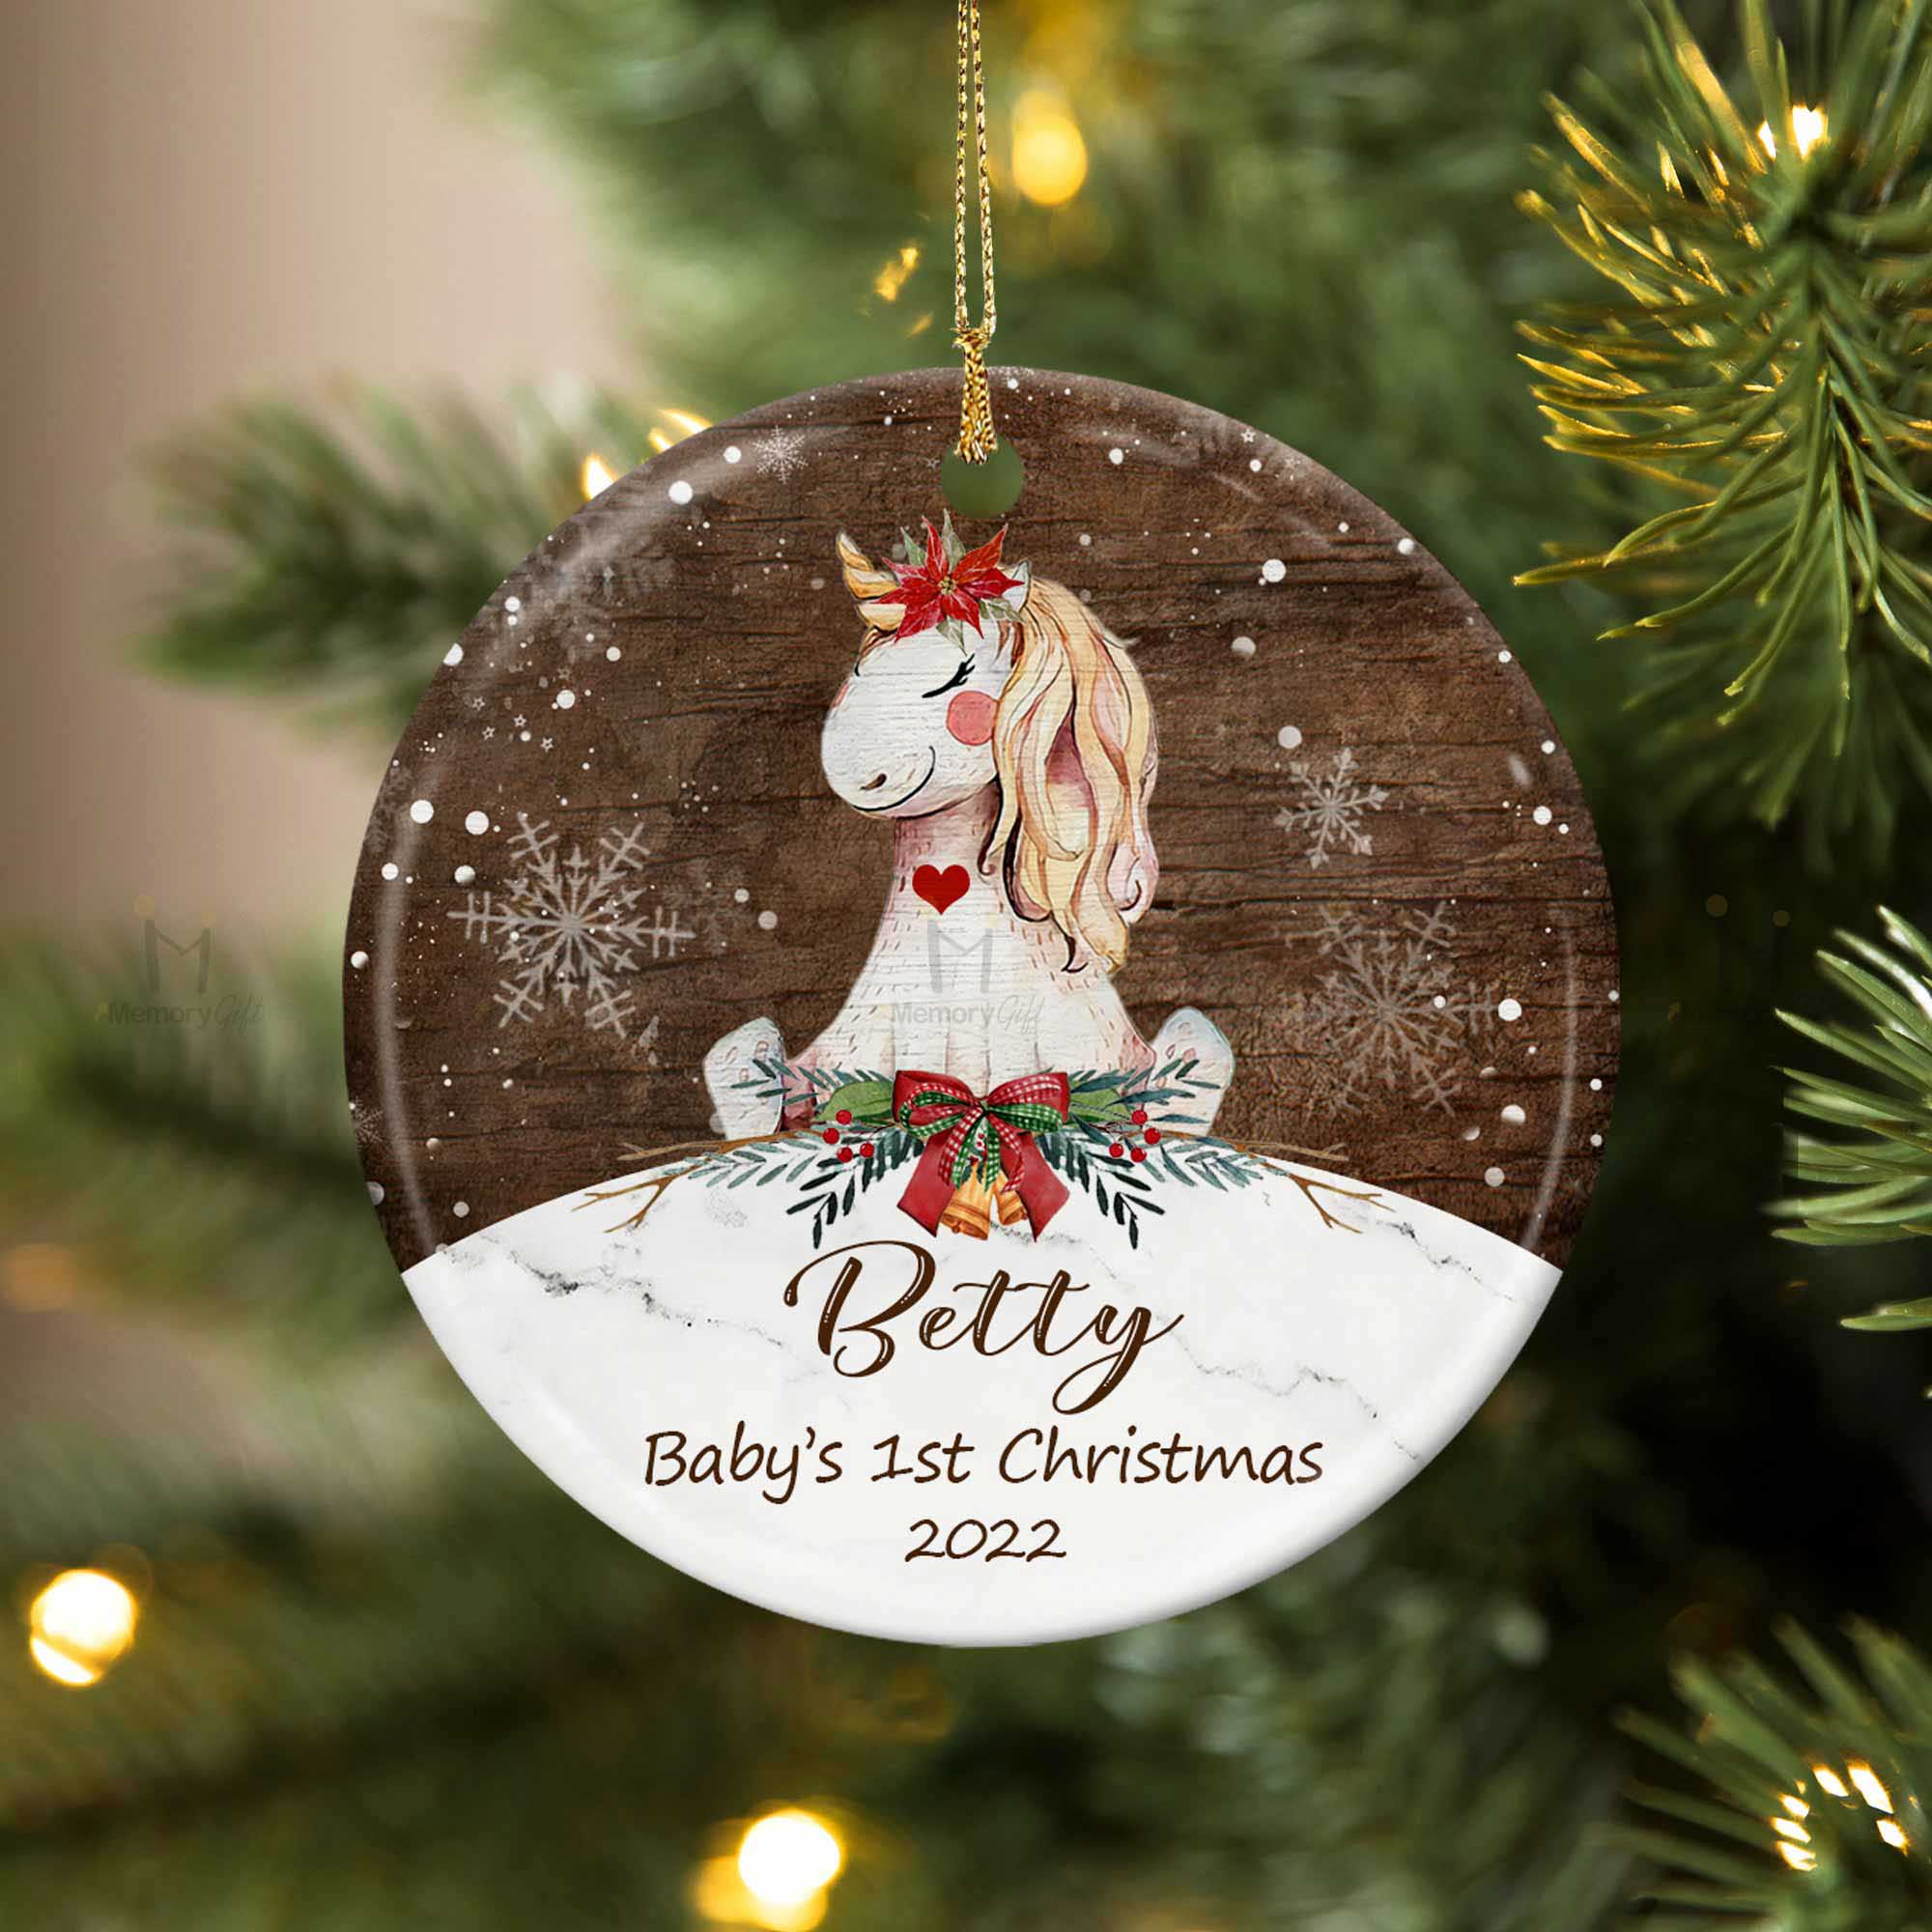 babys first christmas ornament 2022